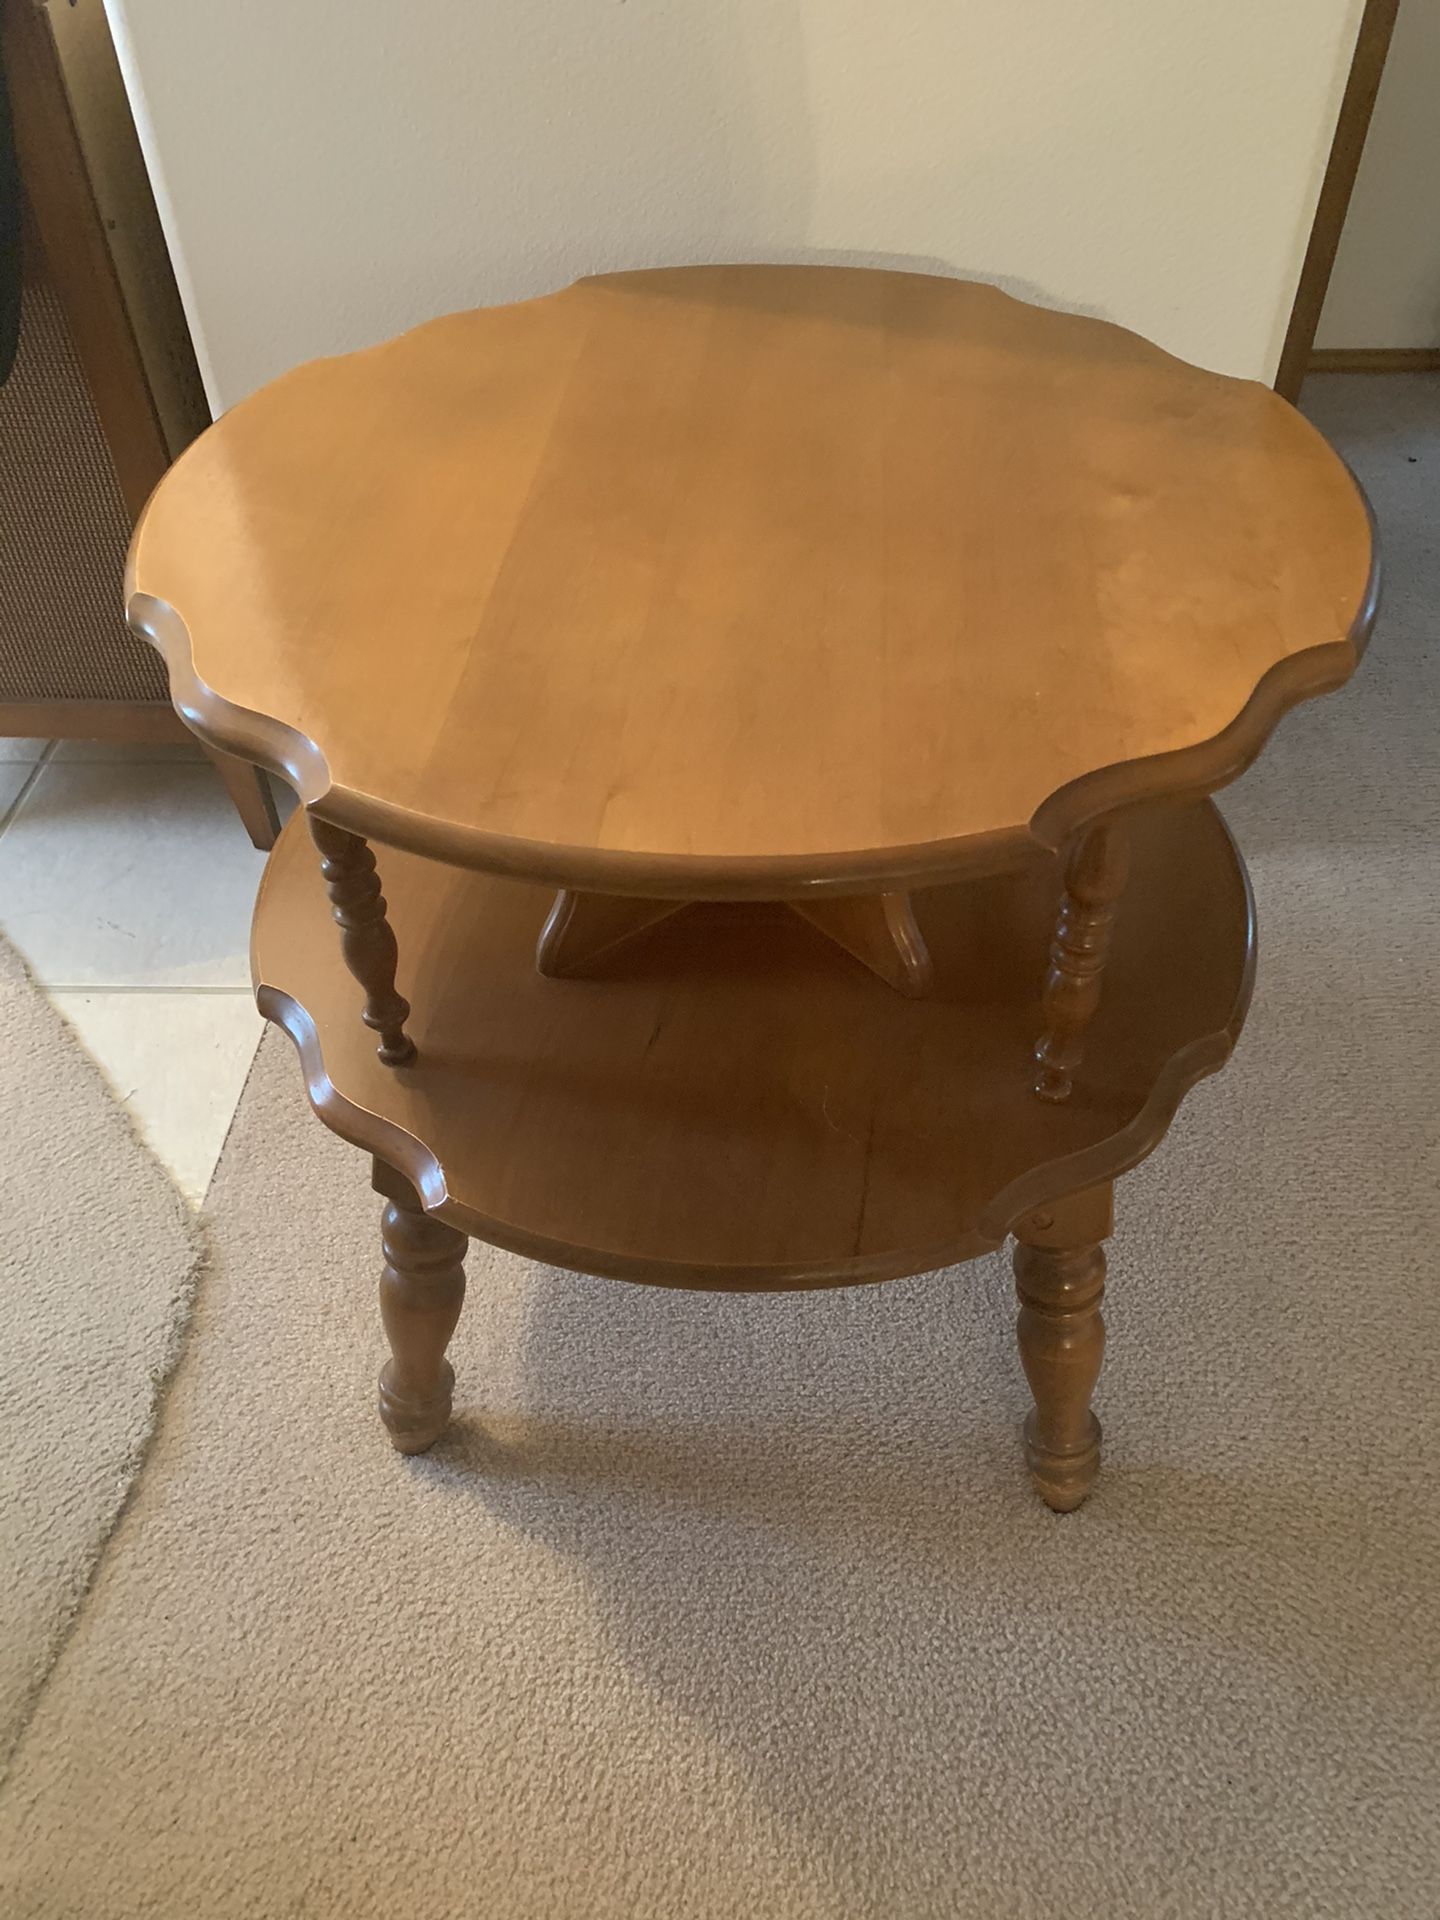 Vintage Round end table. Early American style Round table looks brand new: 24” Diameter and 24”H